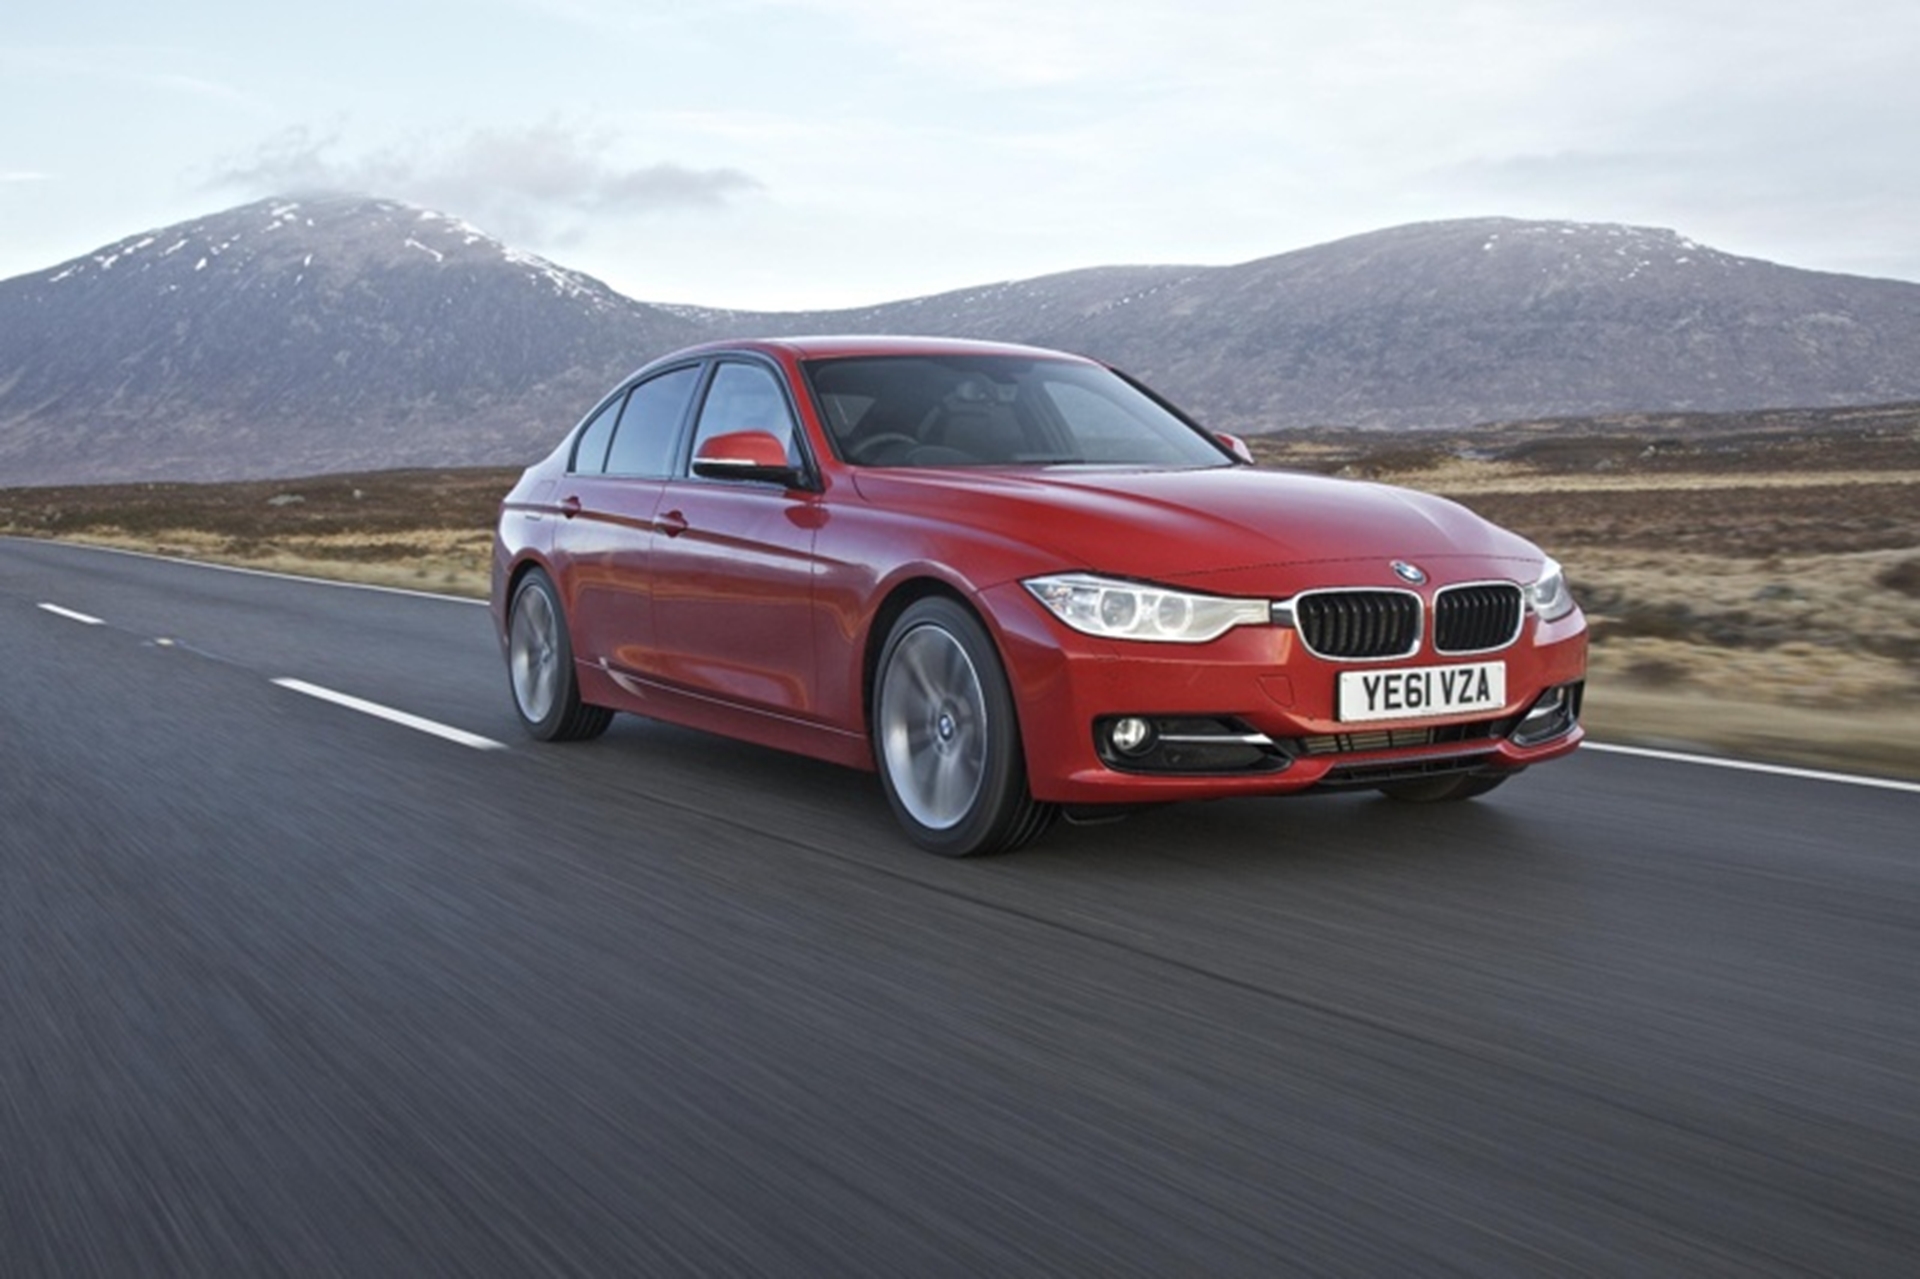 BMW GROUP REPORTS BEST MAY SALES EVER